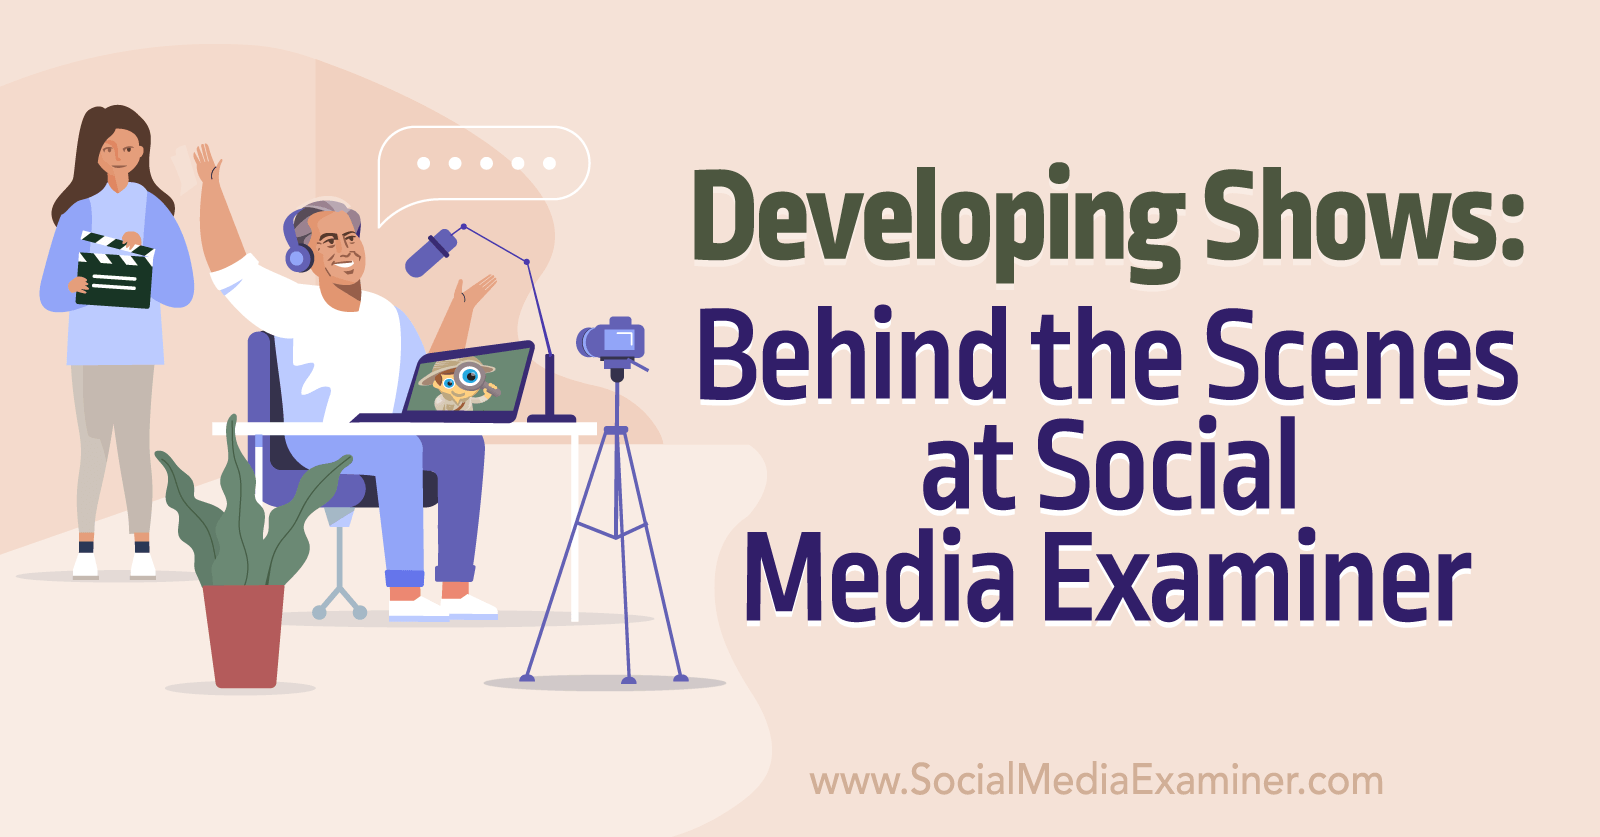 Developing Shows: Behind the Scenes at Social Media Examiner by Social Media Examiner